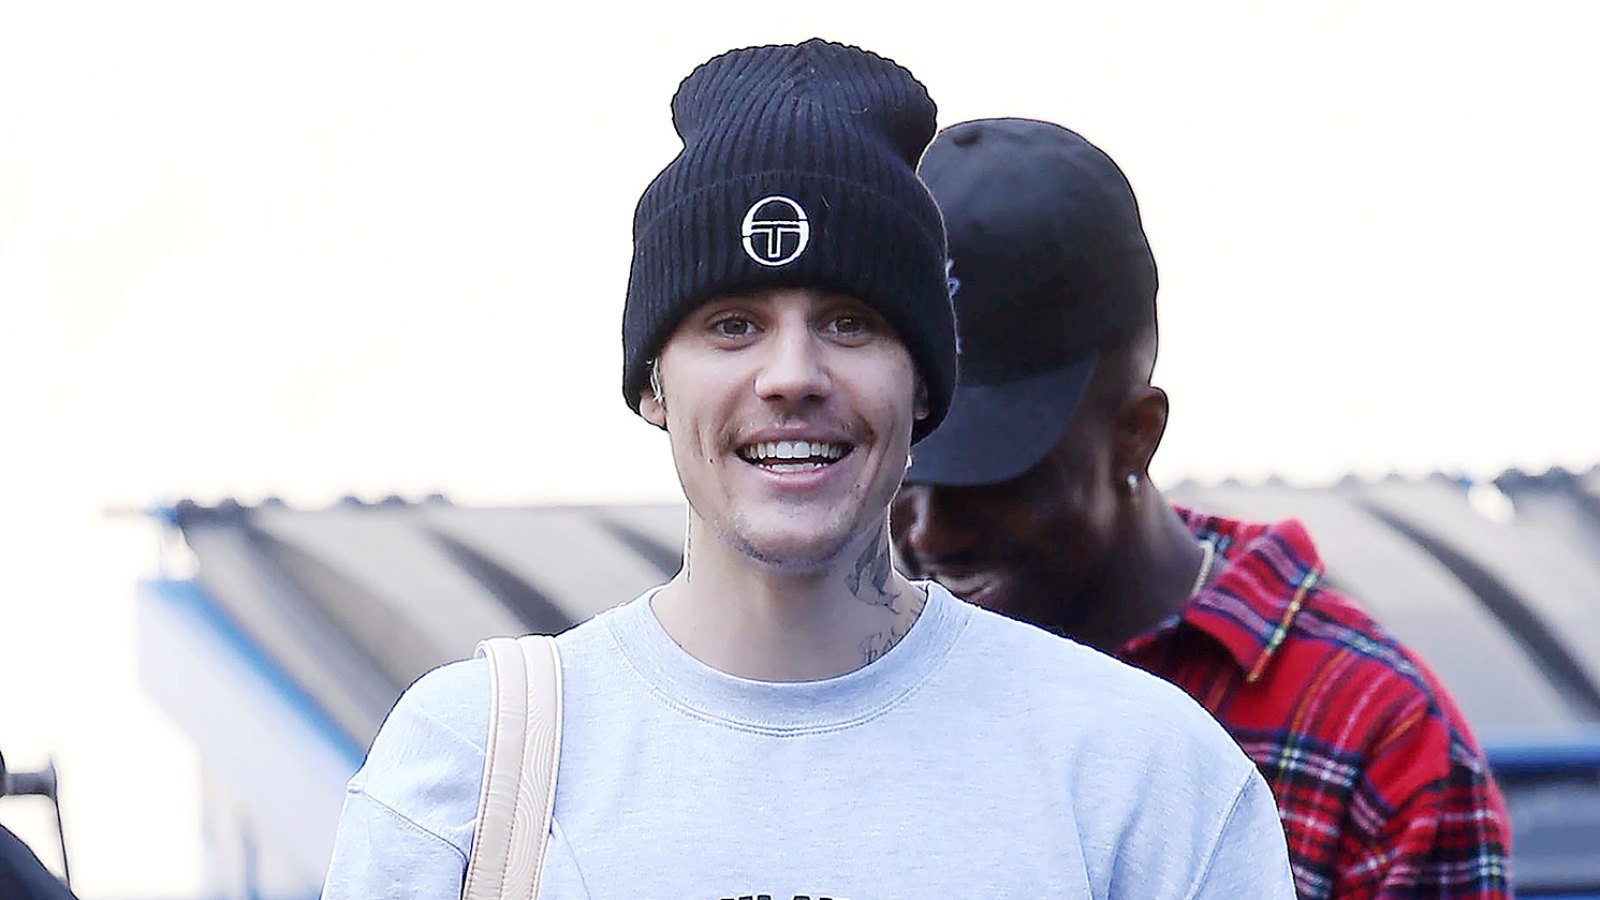 Justin Bieber Ski Hat Smile Loved Ones Reveal-the Exact Moment He Decided to Return to Music